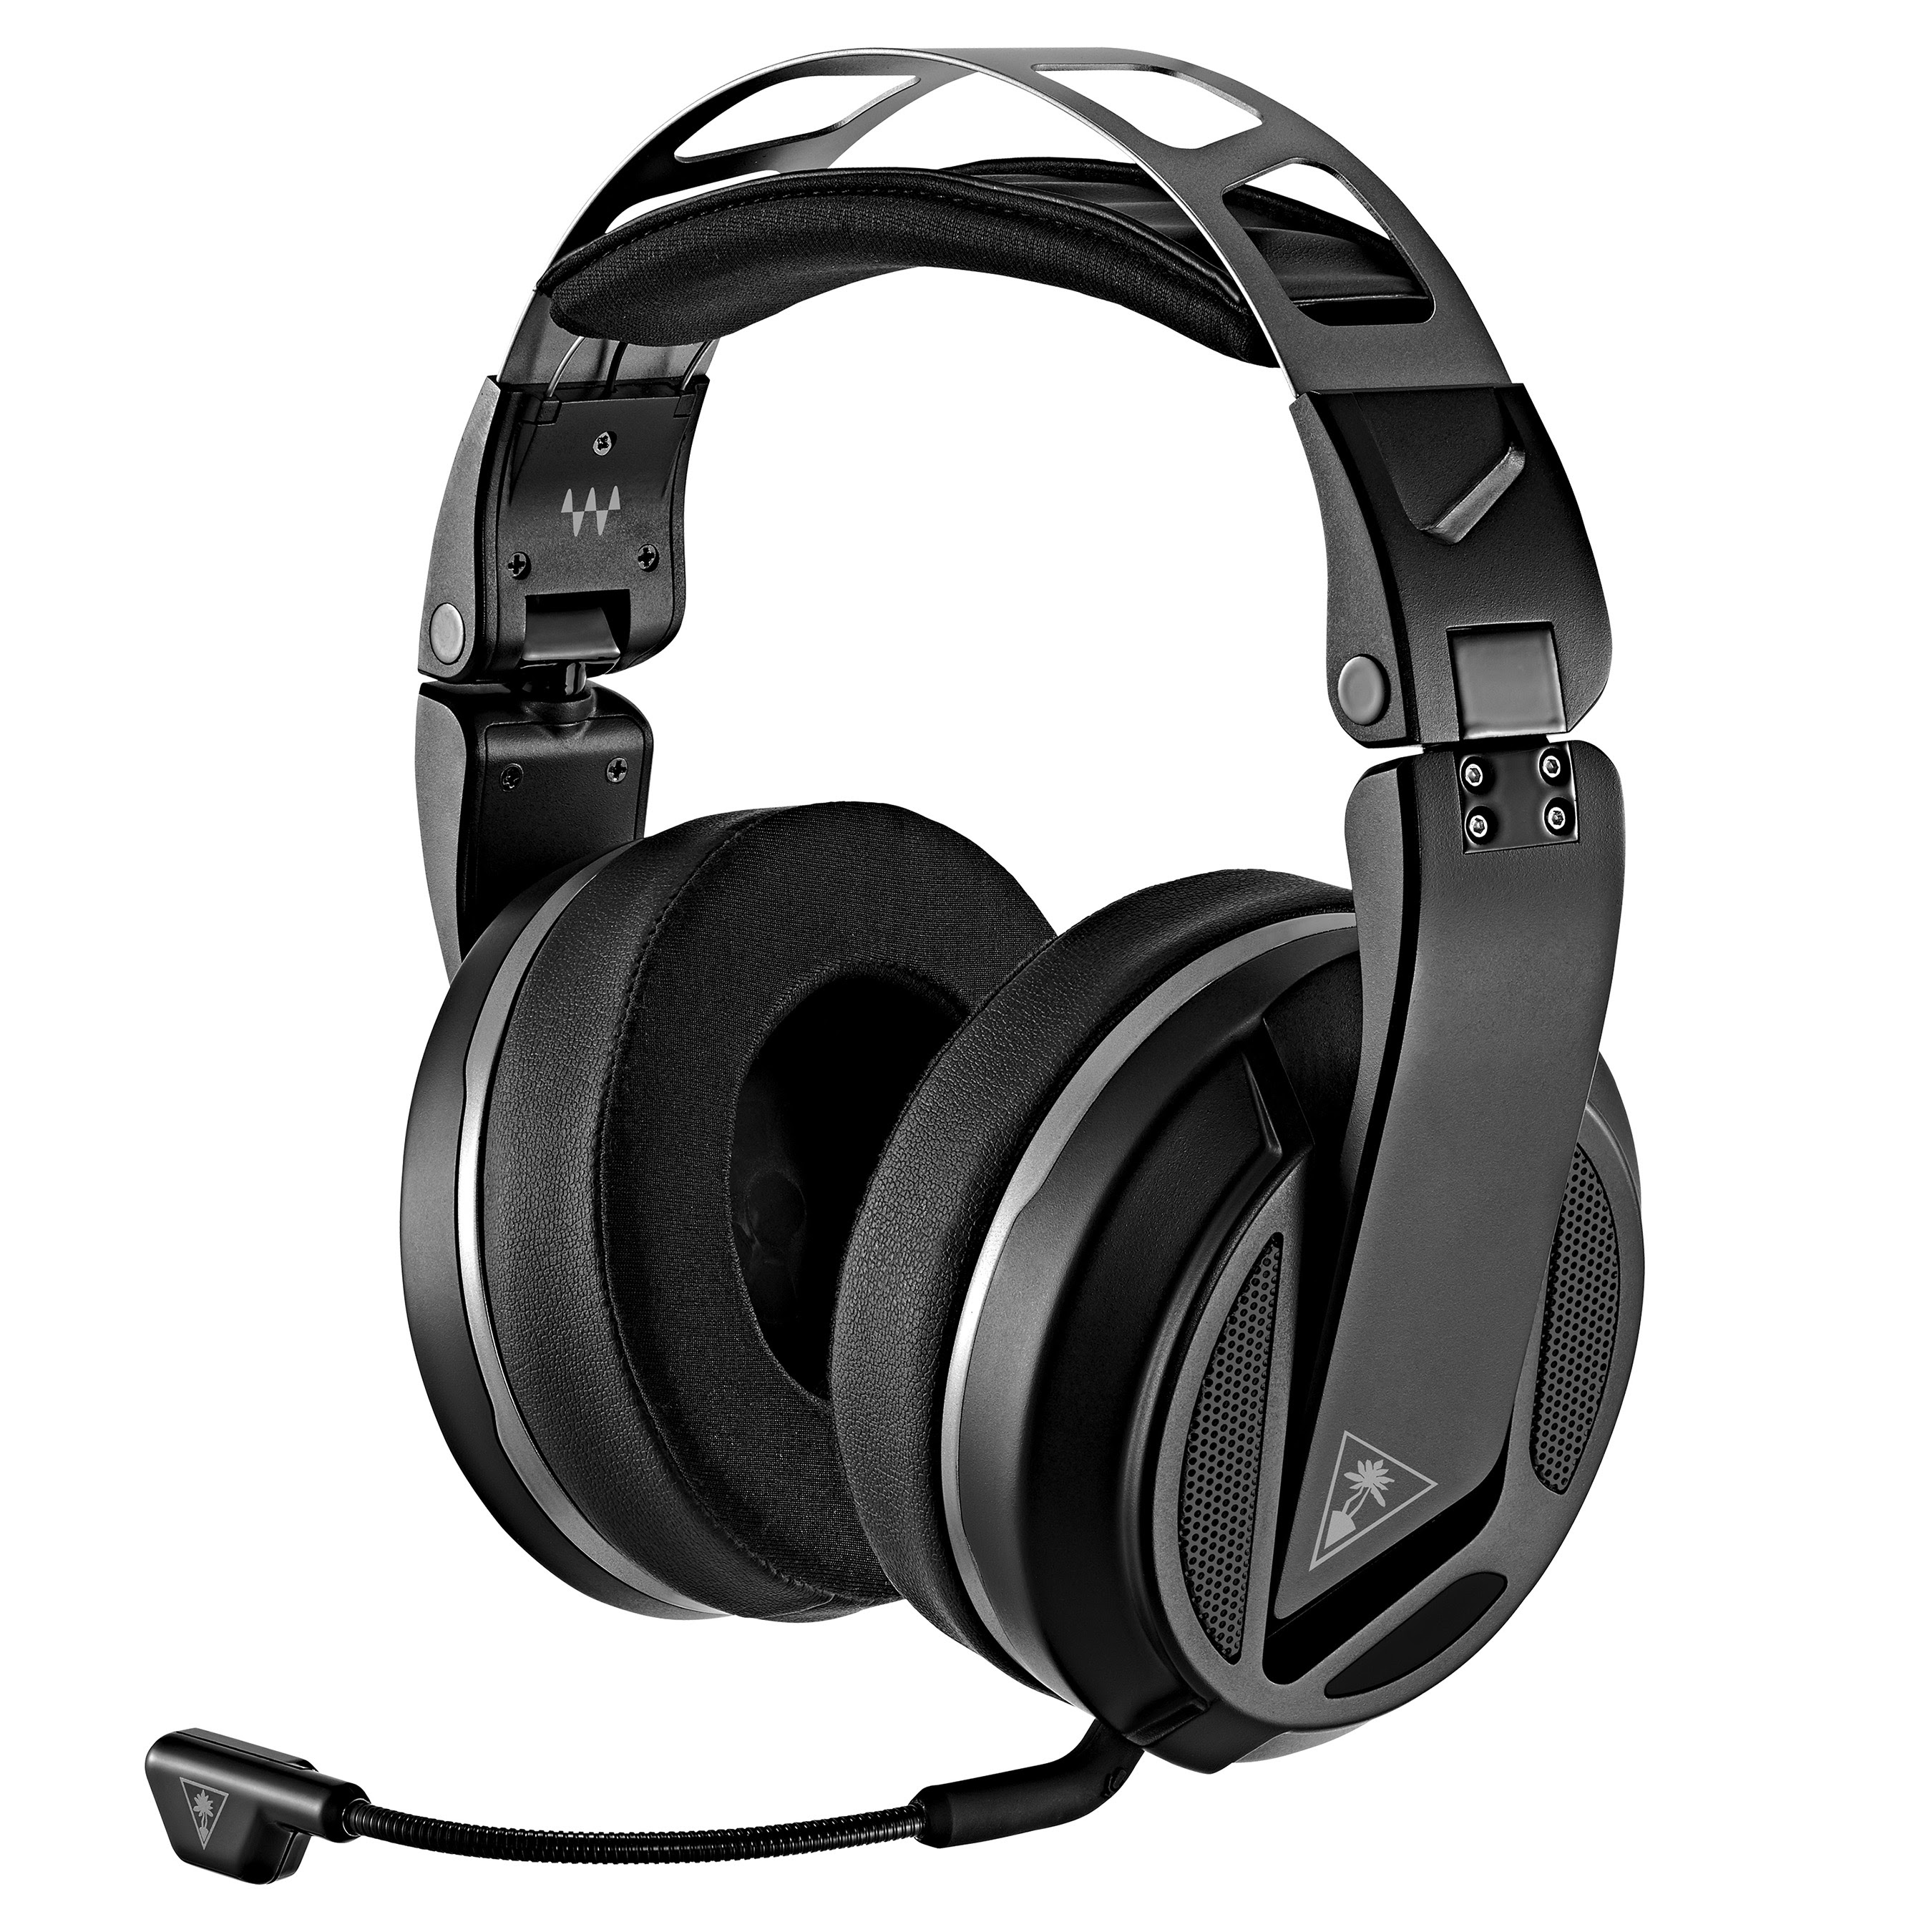 Turtle Beach Raises The Bar For High-Quality PC Audio With The Elite Atlas Aero Wireless High-Performance PC Headset – Now Available At Participating Retailers Worldwide